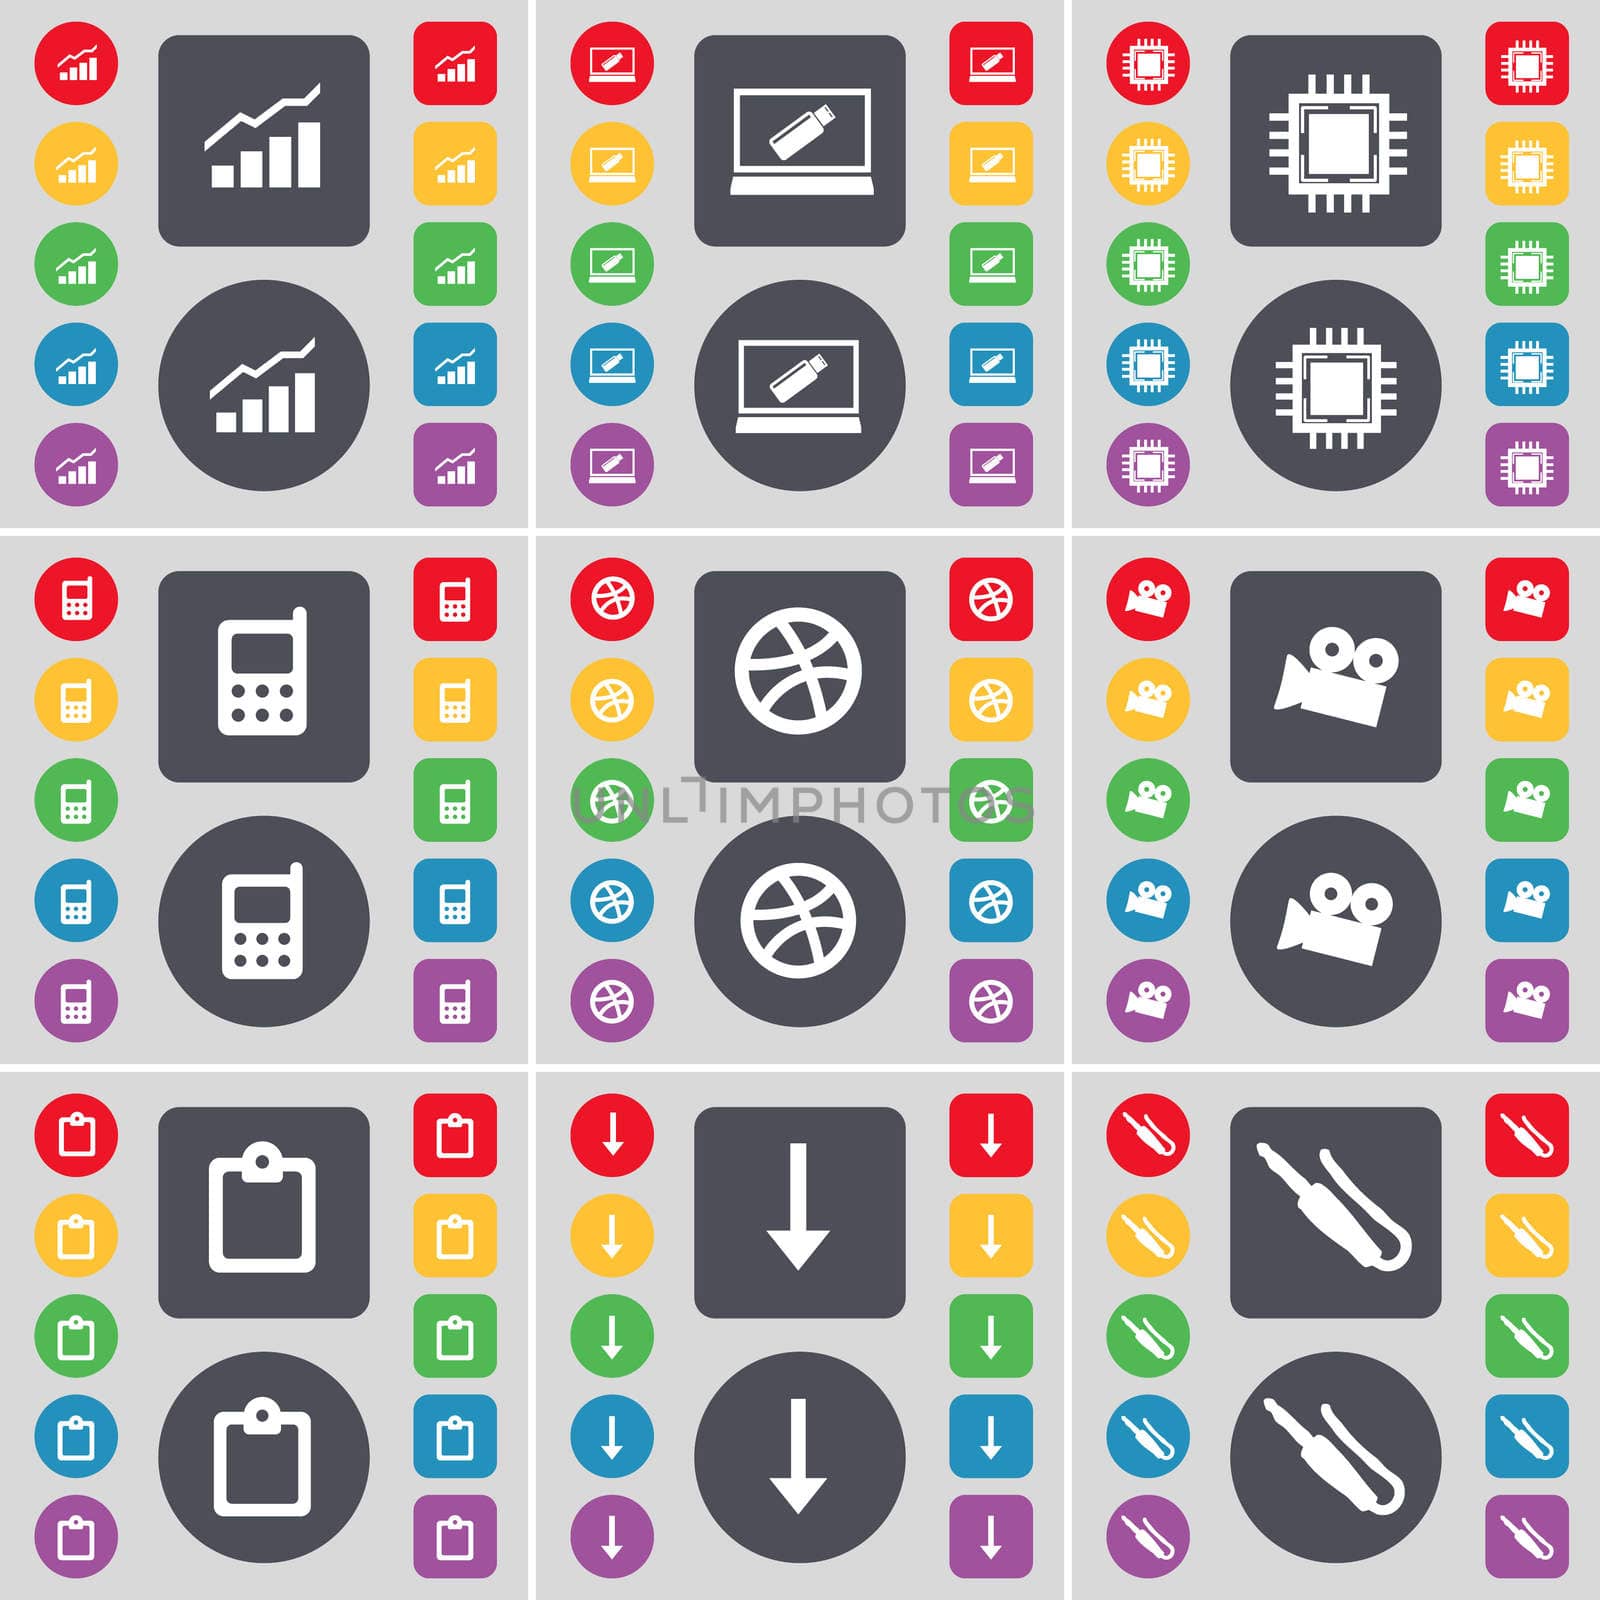 Graph, Laptop, Processor, Mobile phone, Ball, Film camera, Survey, Arrow down, Microphone connector icon symbol. A large set of flat, colored buttons for your design. illustration